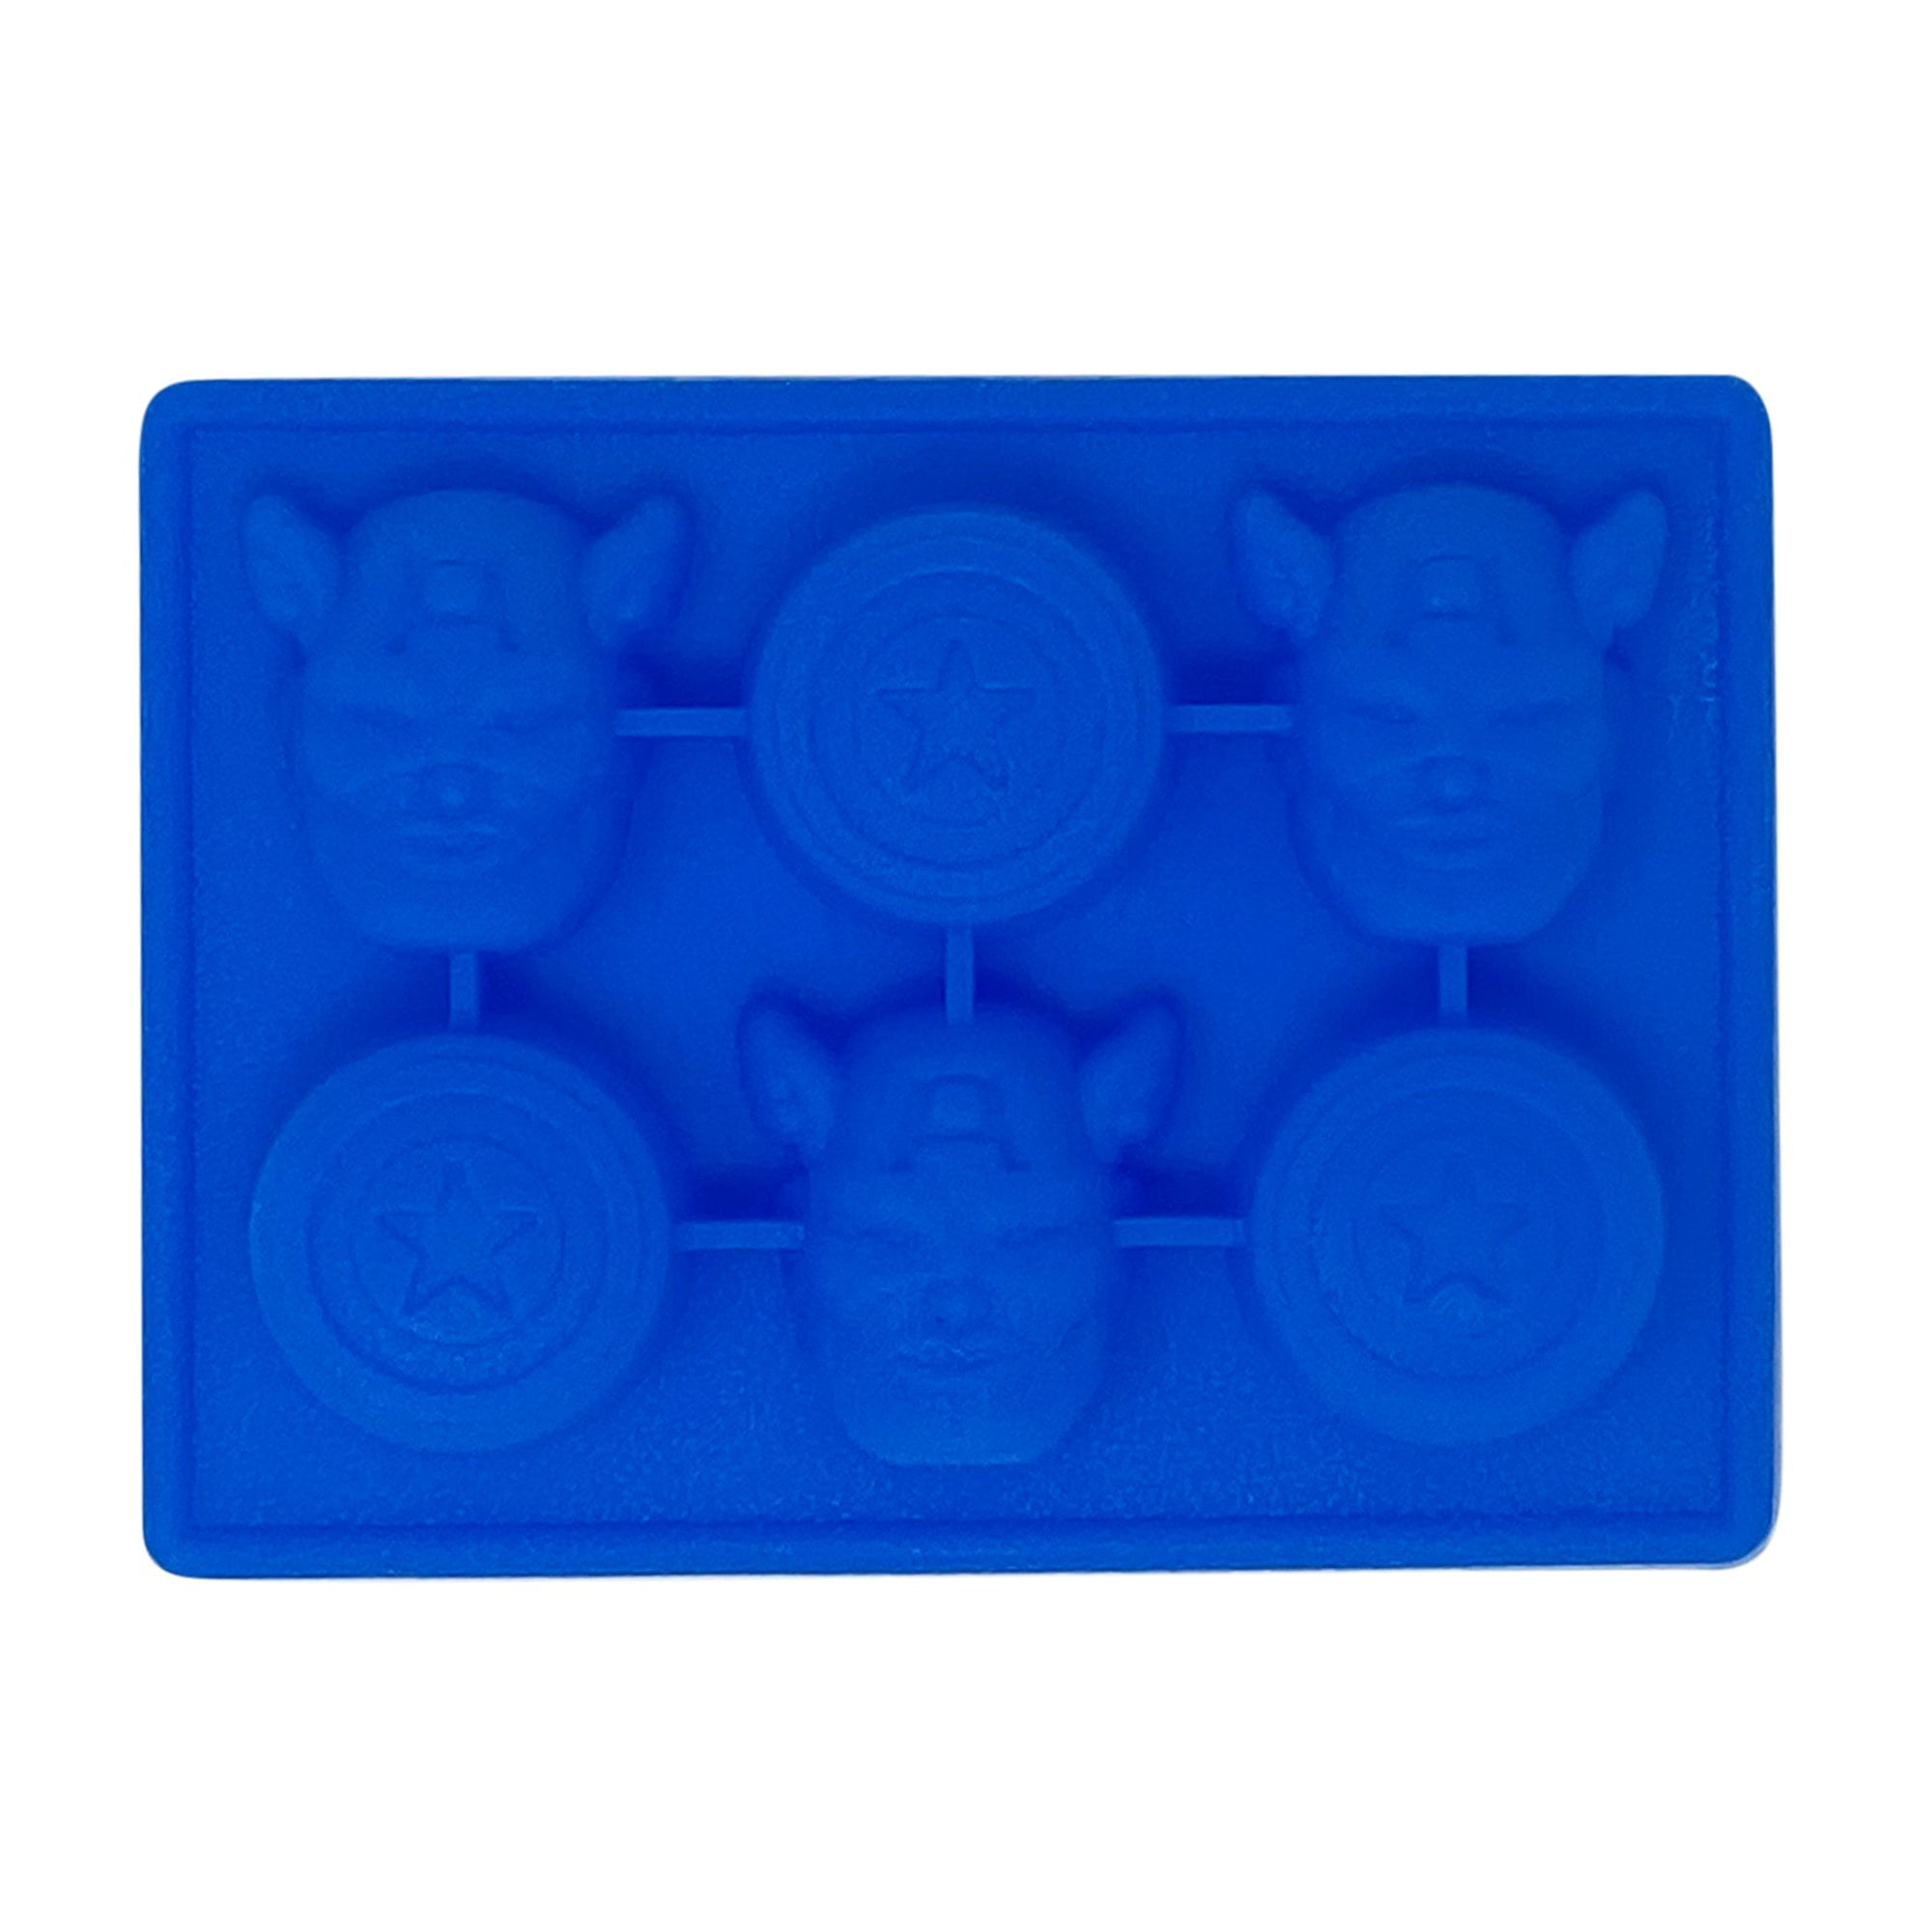 2pcs Adult Prank Ice Cube Mold,silicone Ice Cube Mold Funny Man